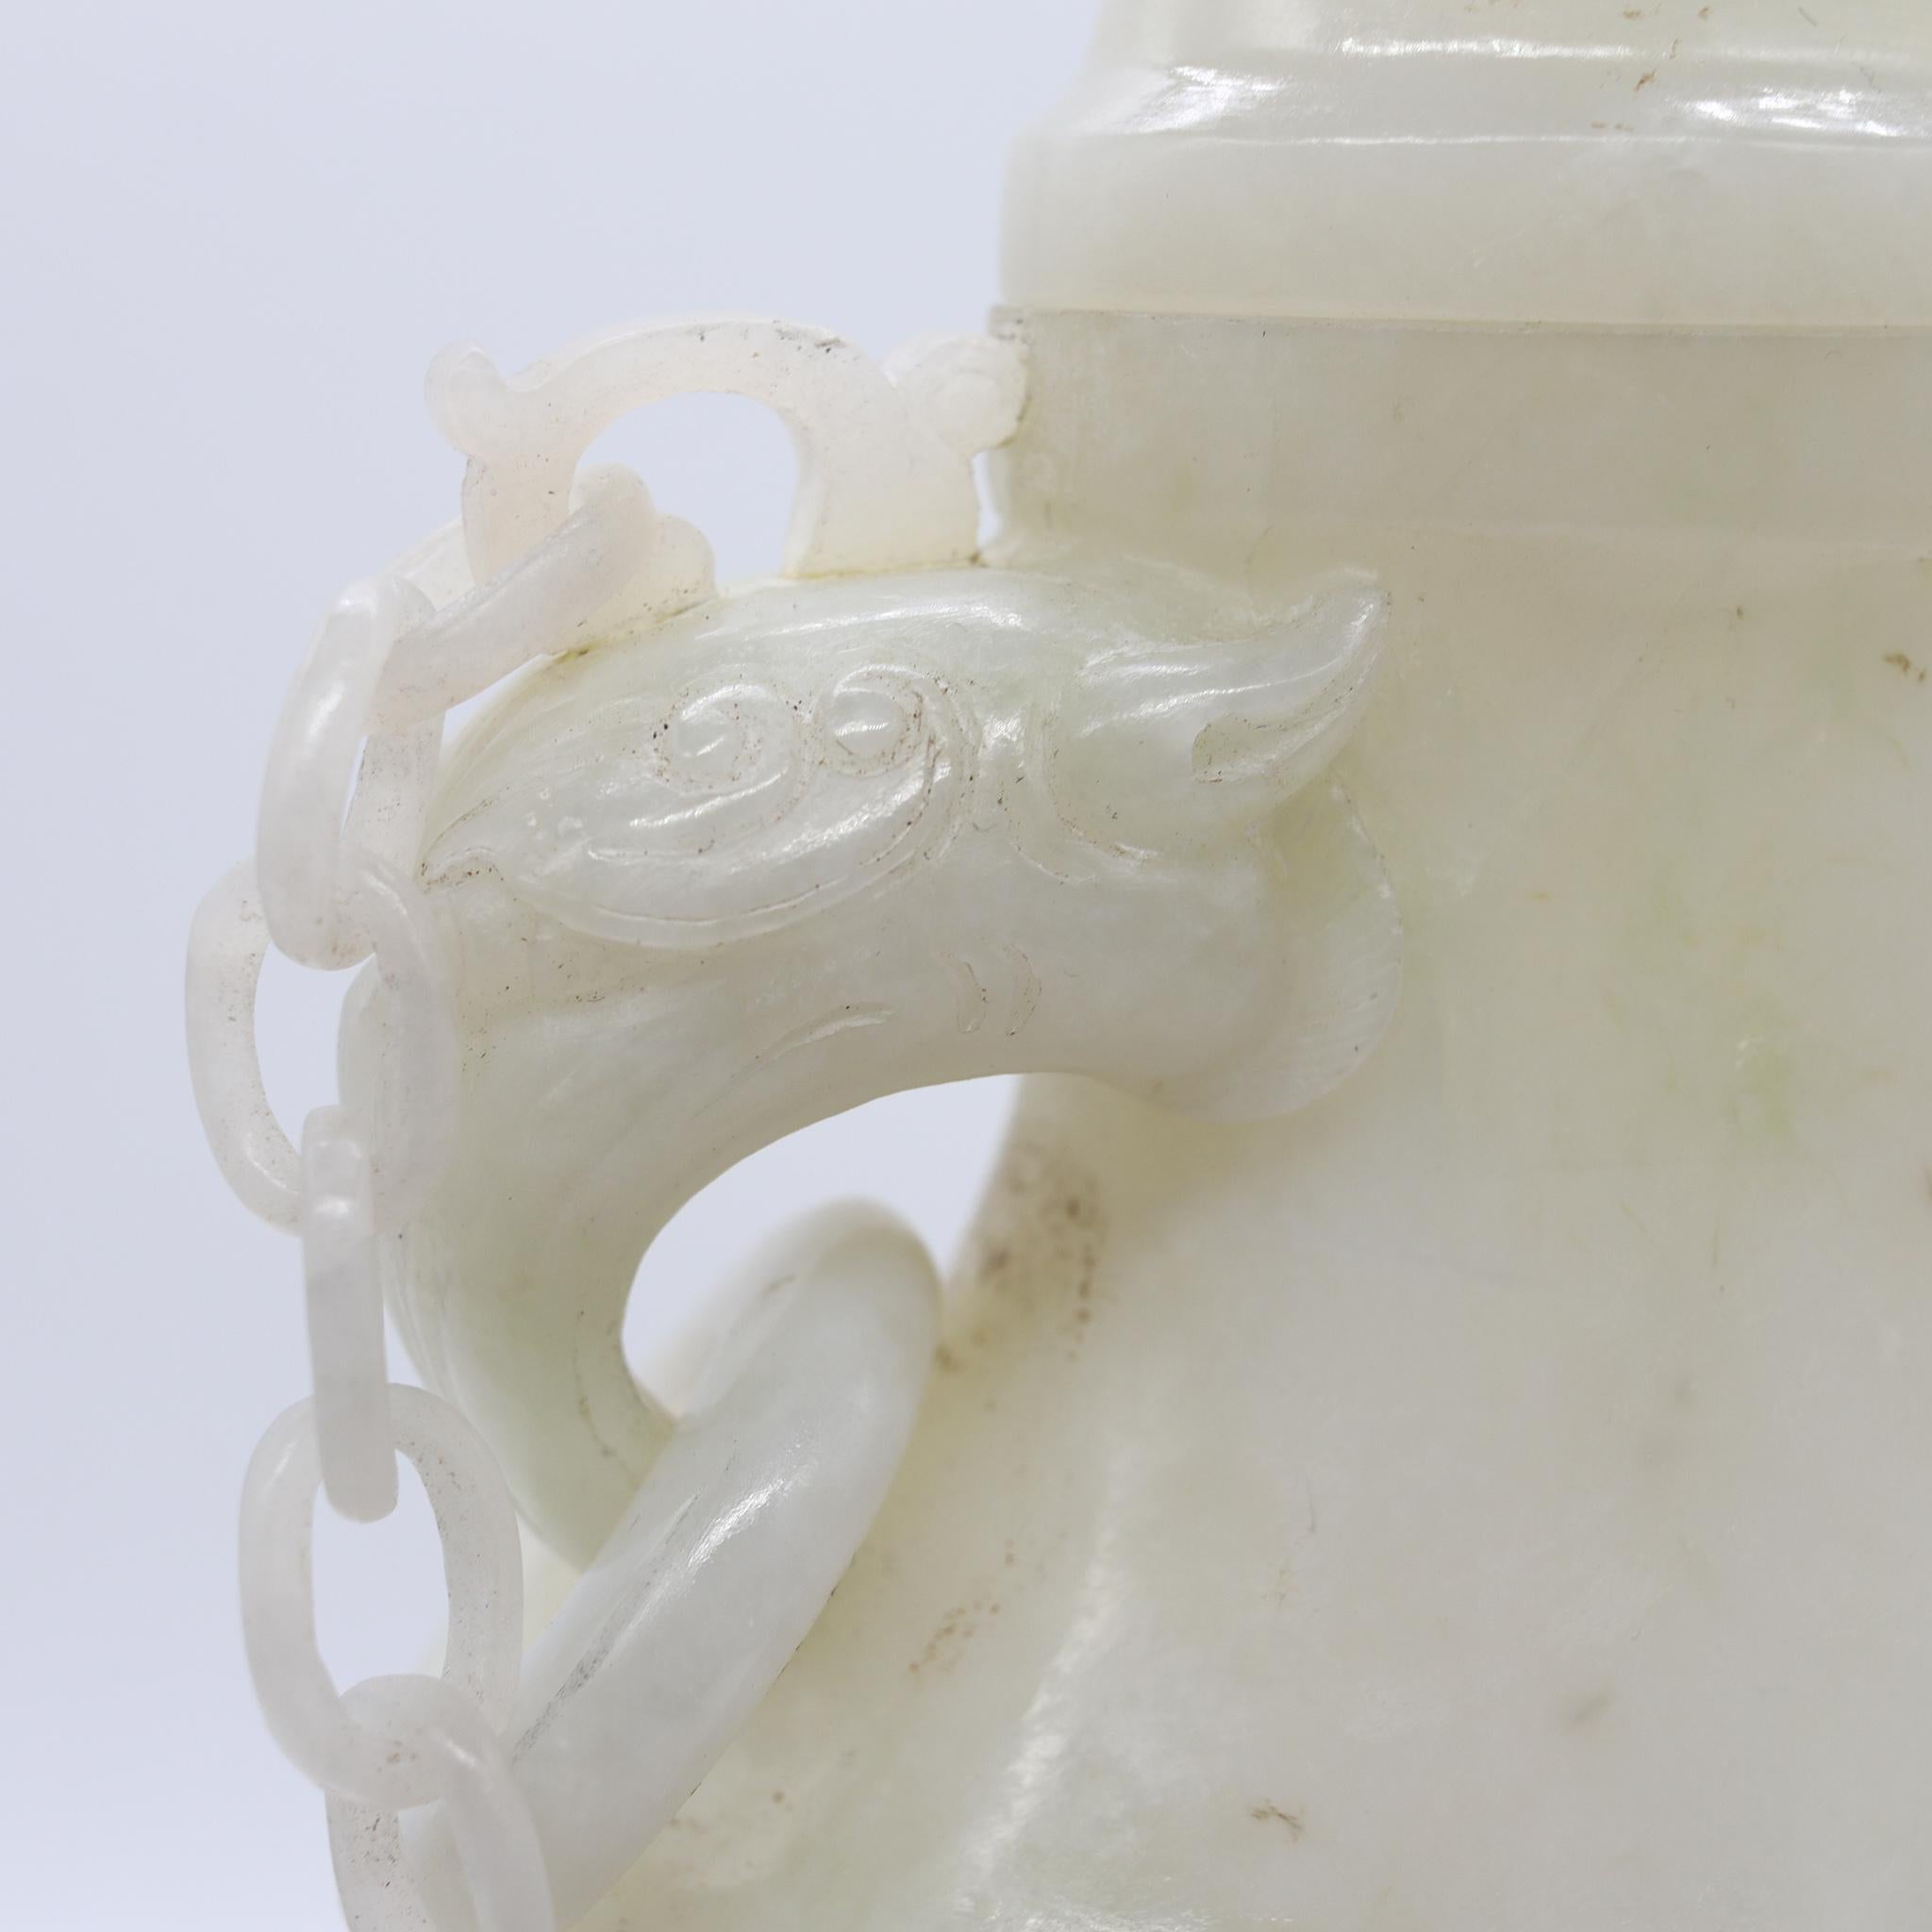 Urn Jar carved from Jadeite jade Qing Dynasty (1644-1911).

An exceptional carved antique lidded covered urn, from the late Qing dynasty (1644-1911) period, circa 1890-1910. They were carved from a single solid piece of natural jadeite white jade